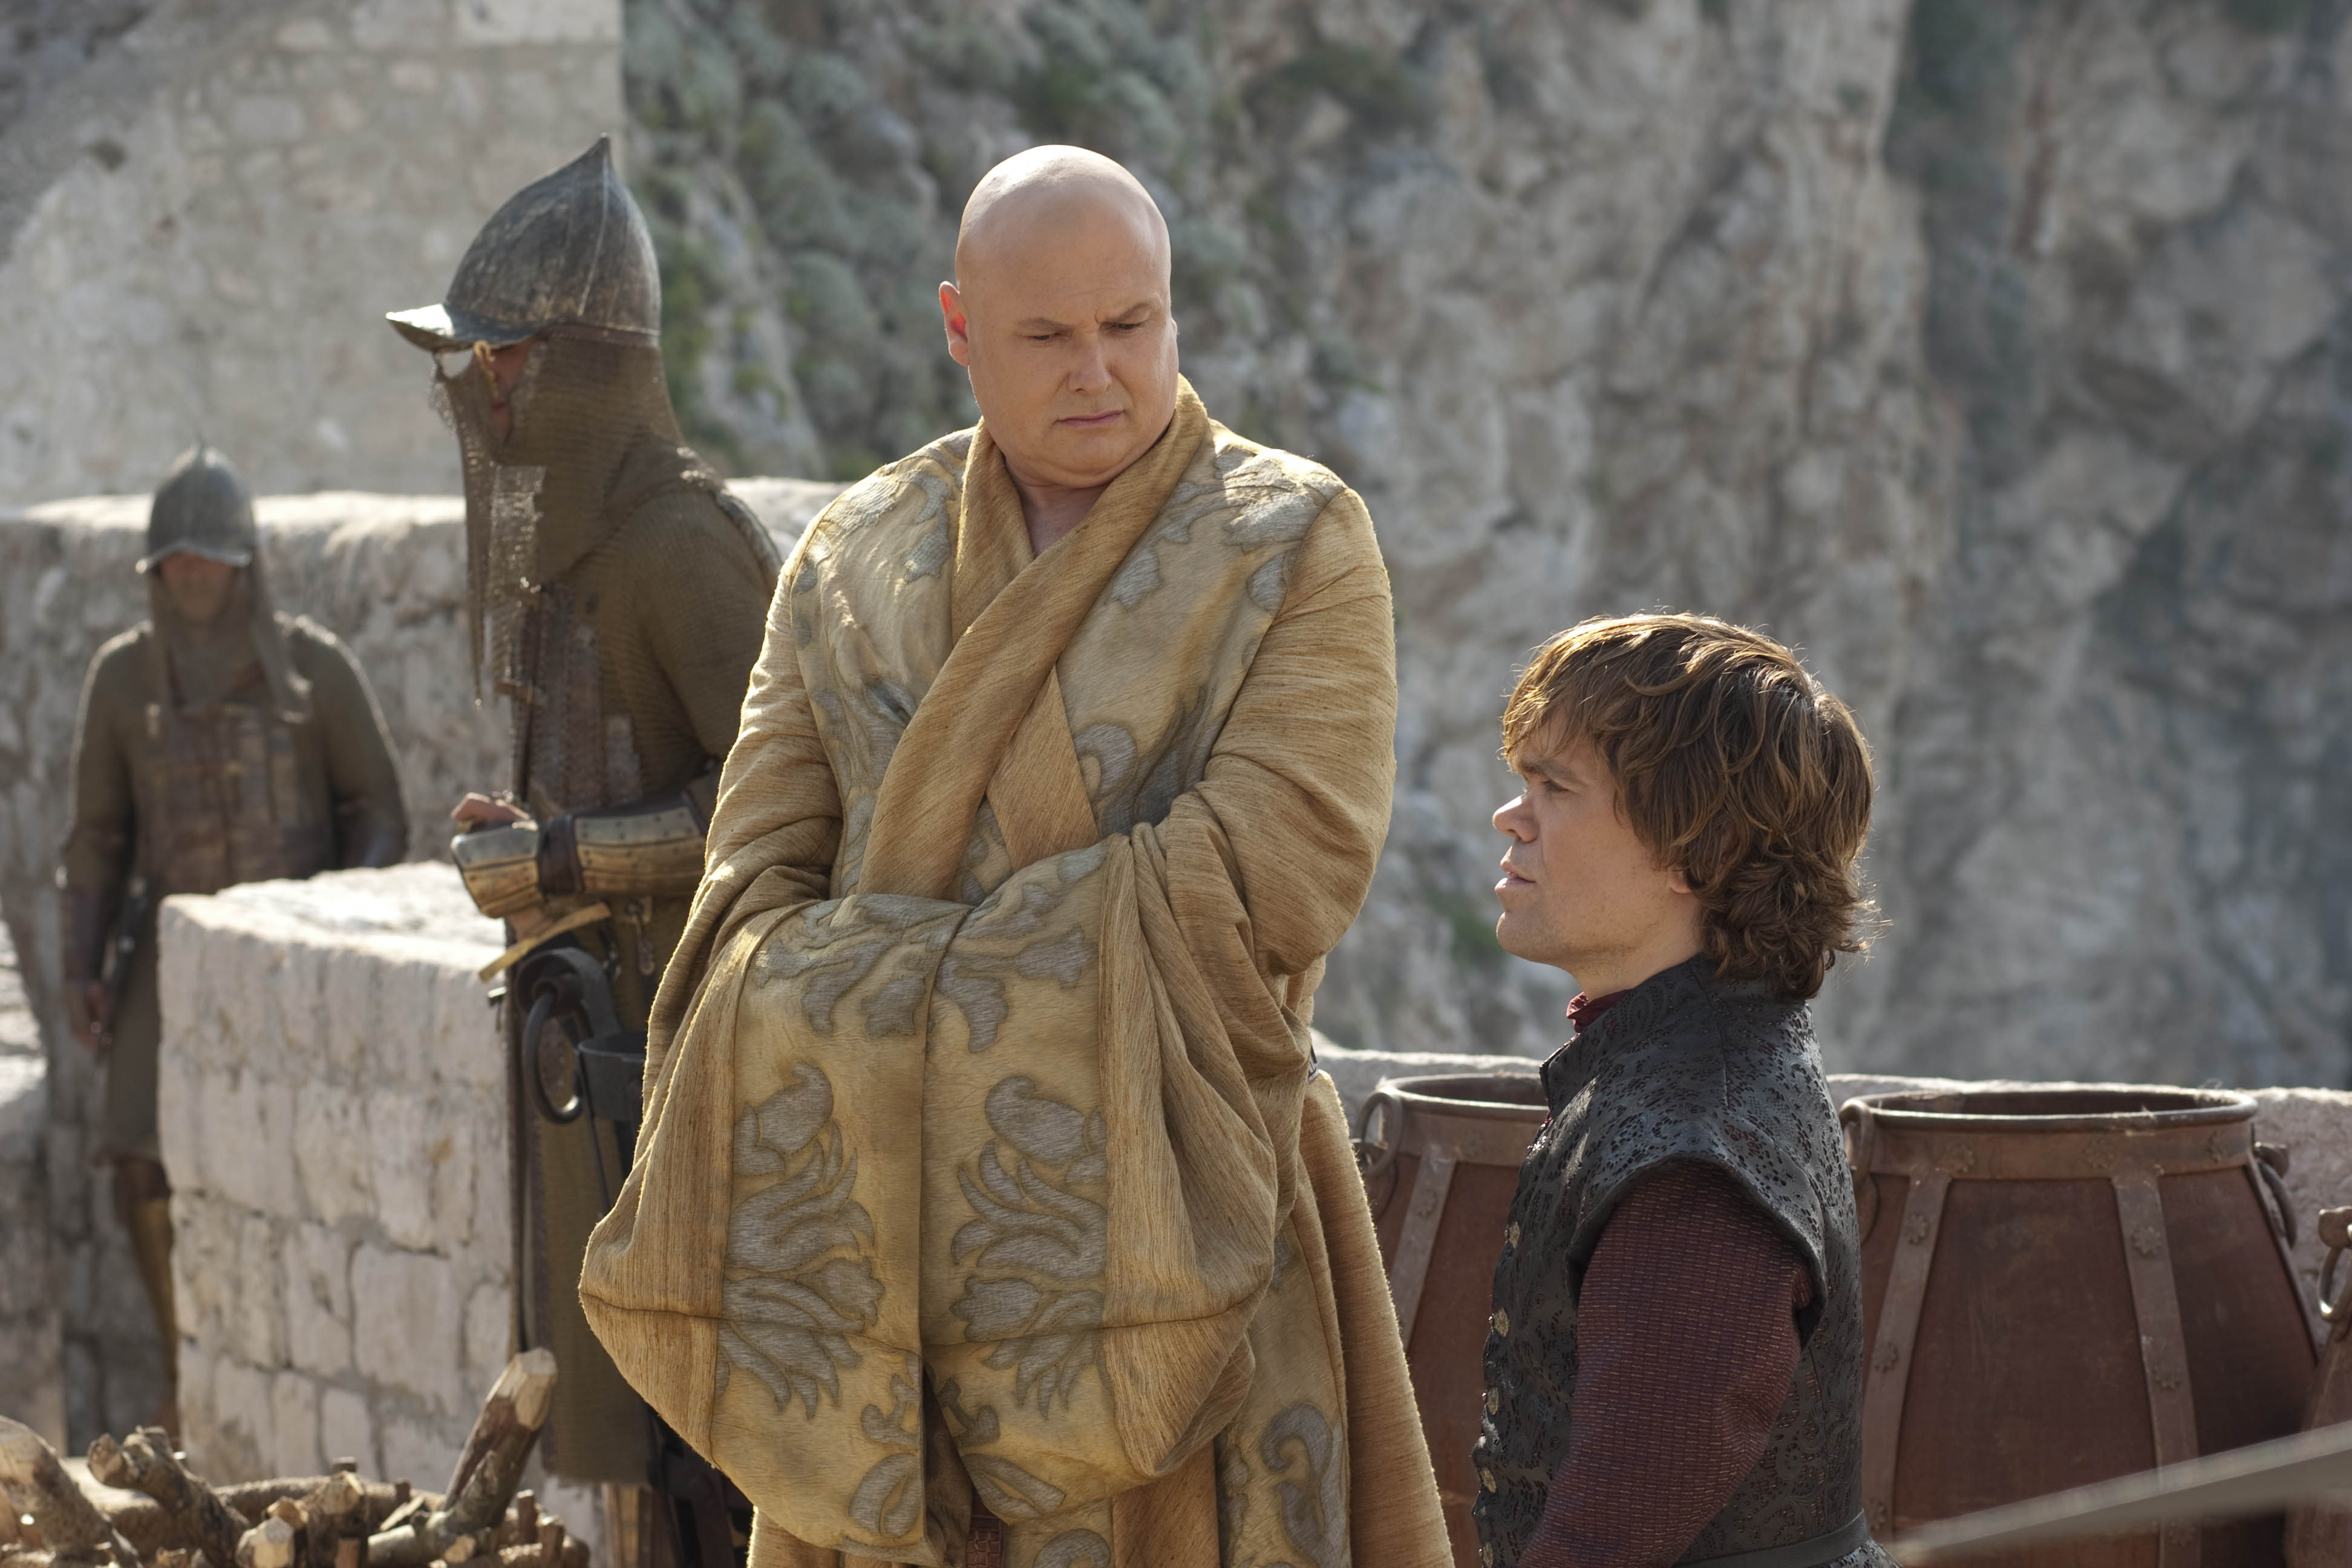 Lord Varys Tyrion Lannister 3888x2592